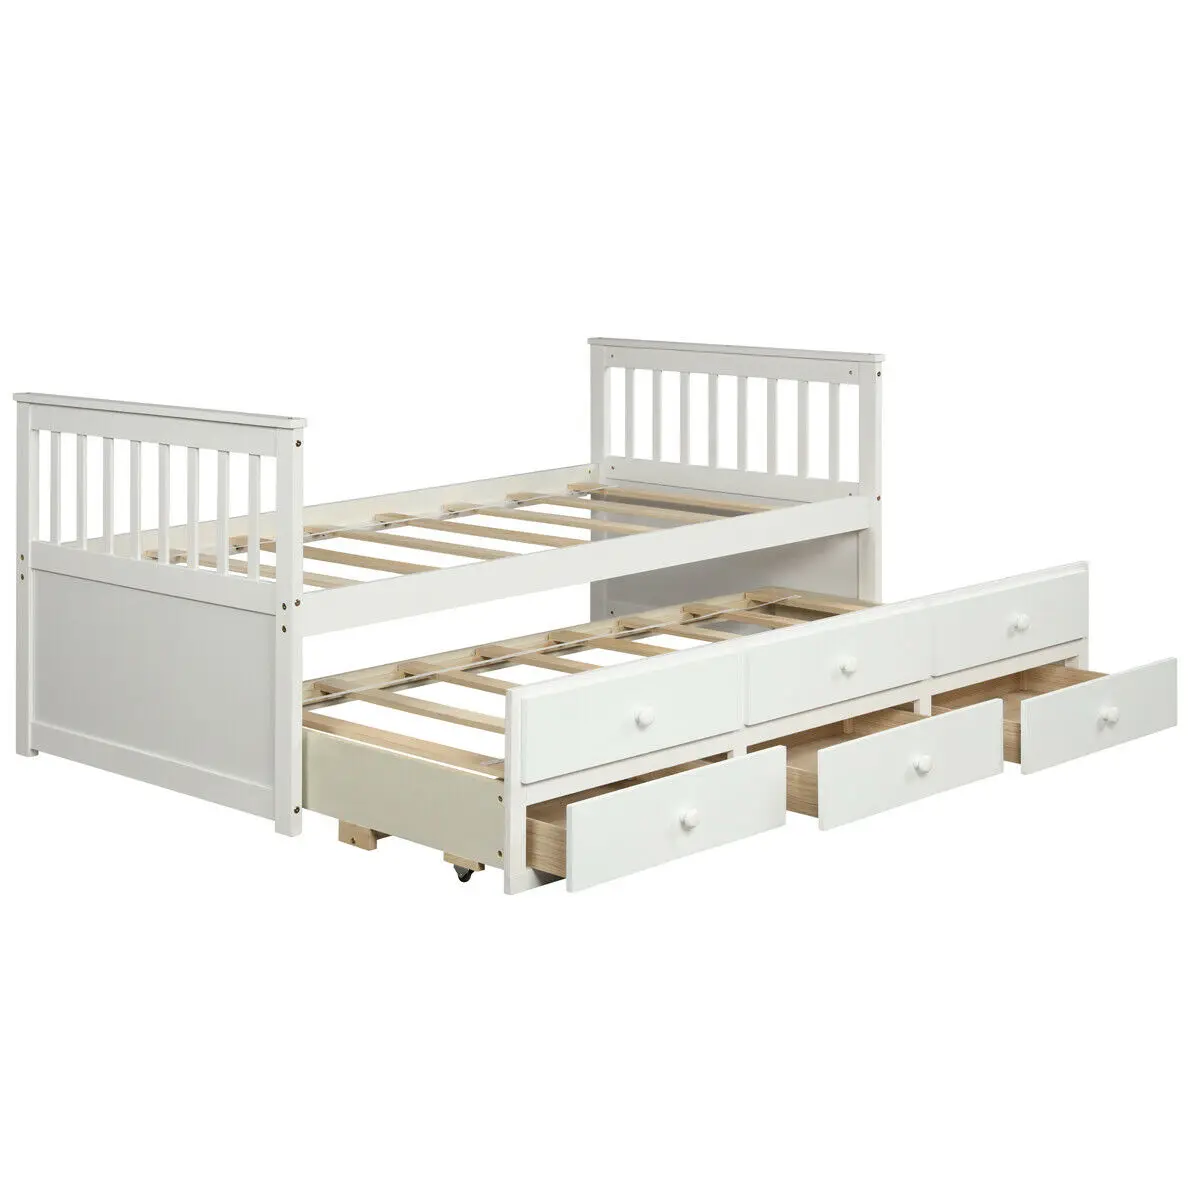 Twin Captain's Bed Bunk Bed Alternative w/ Trundle & Drawers for Kids White